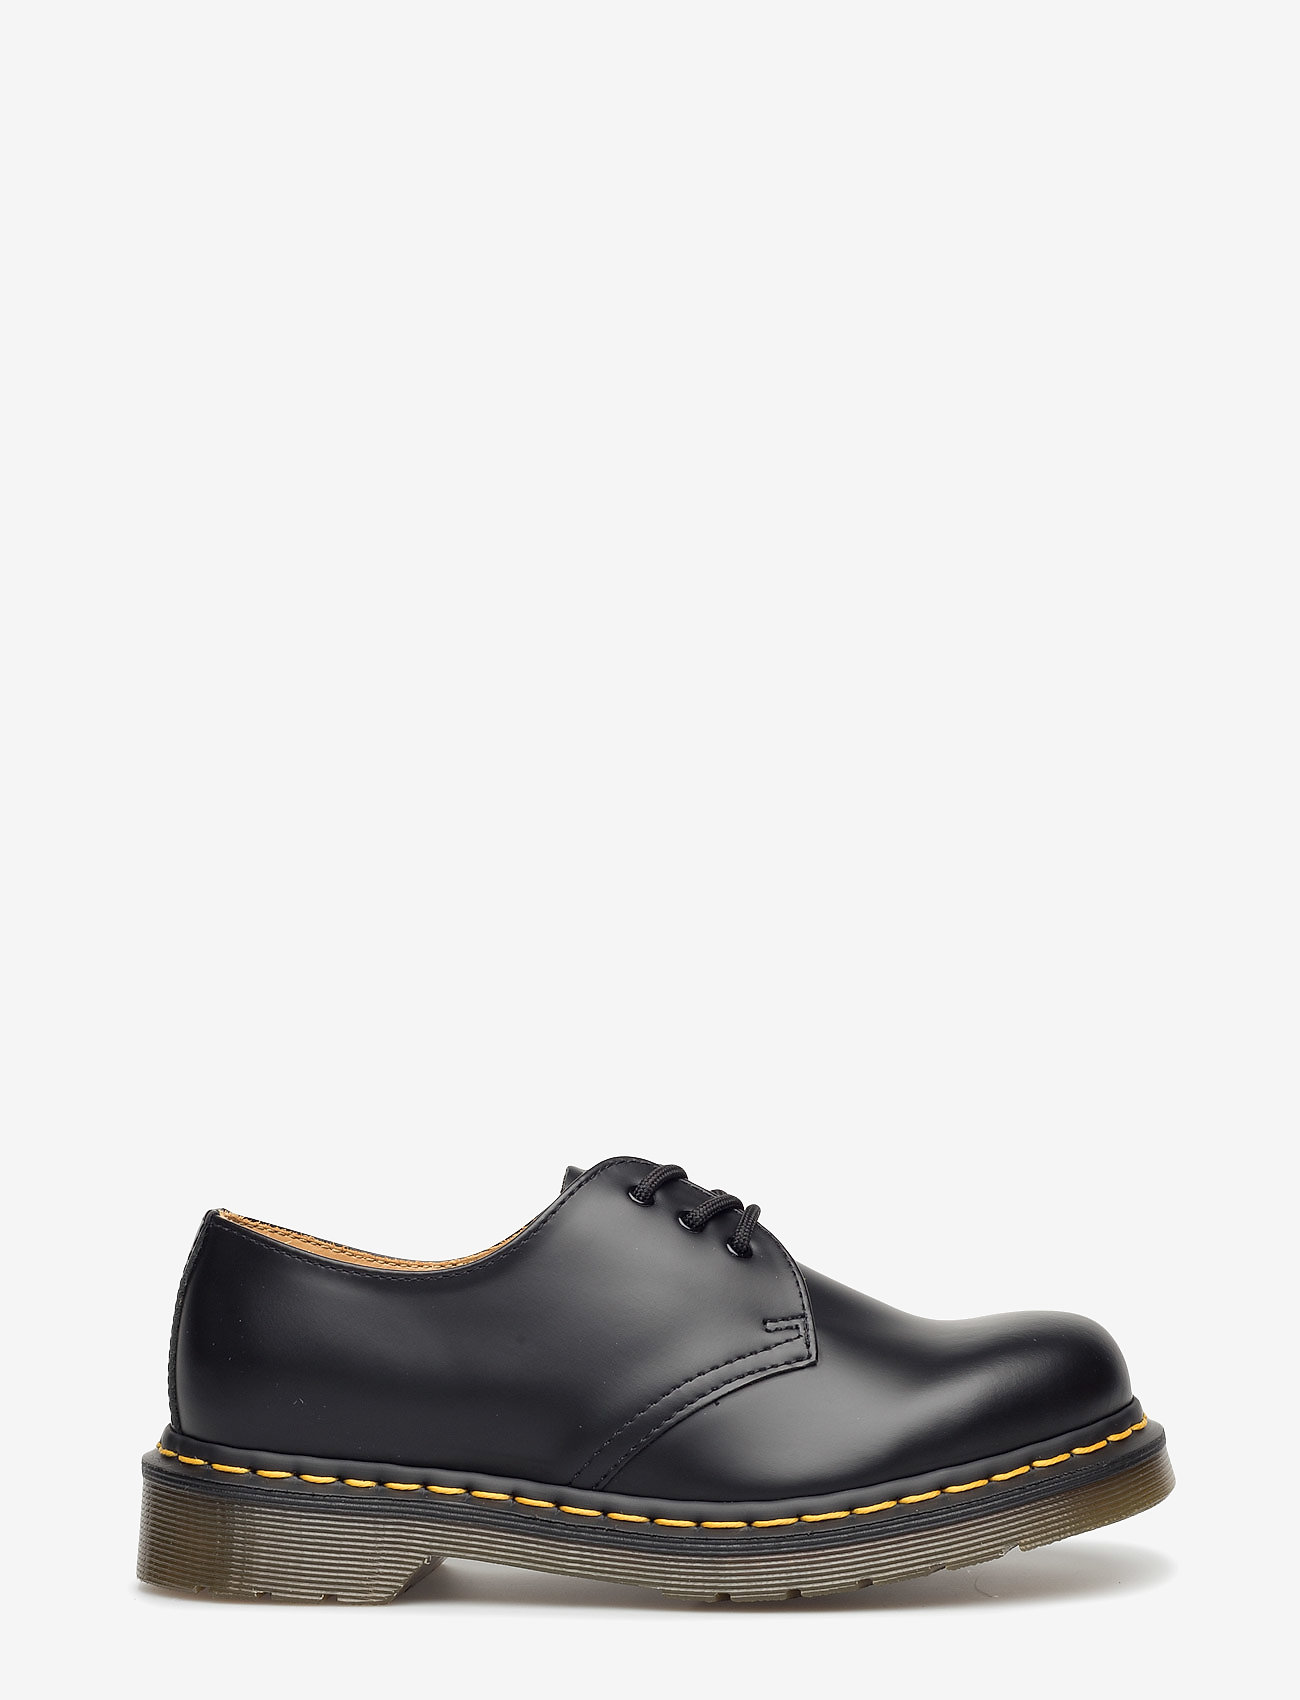 Dr. Martens - 1461 Black Smooth - chaussures oxford - black - 1